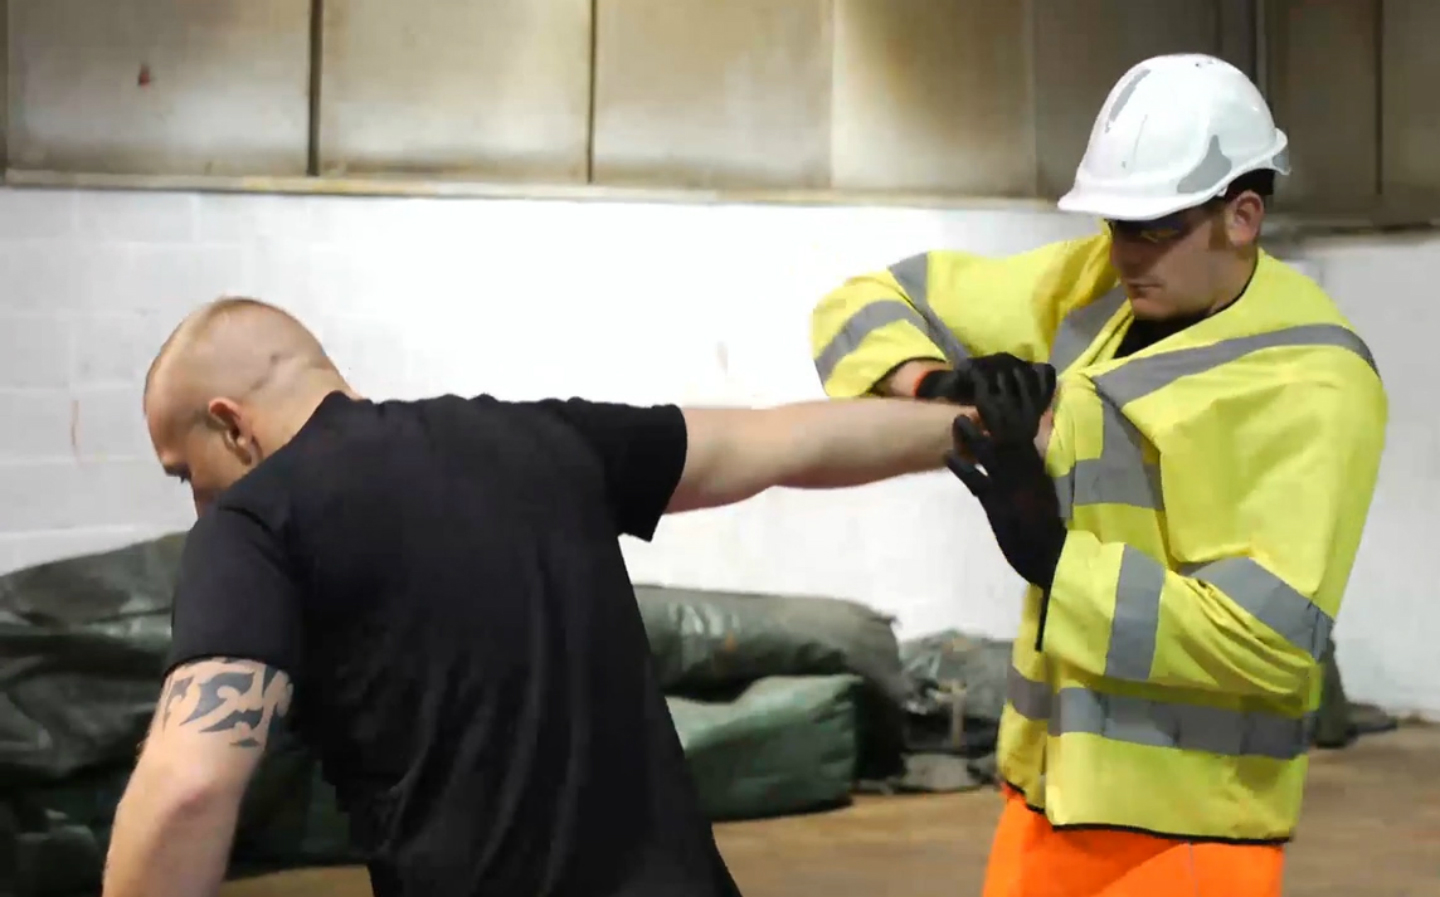 Road workers get combat training after attacks rise